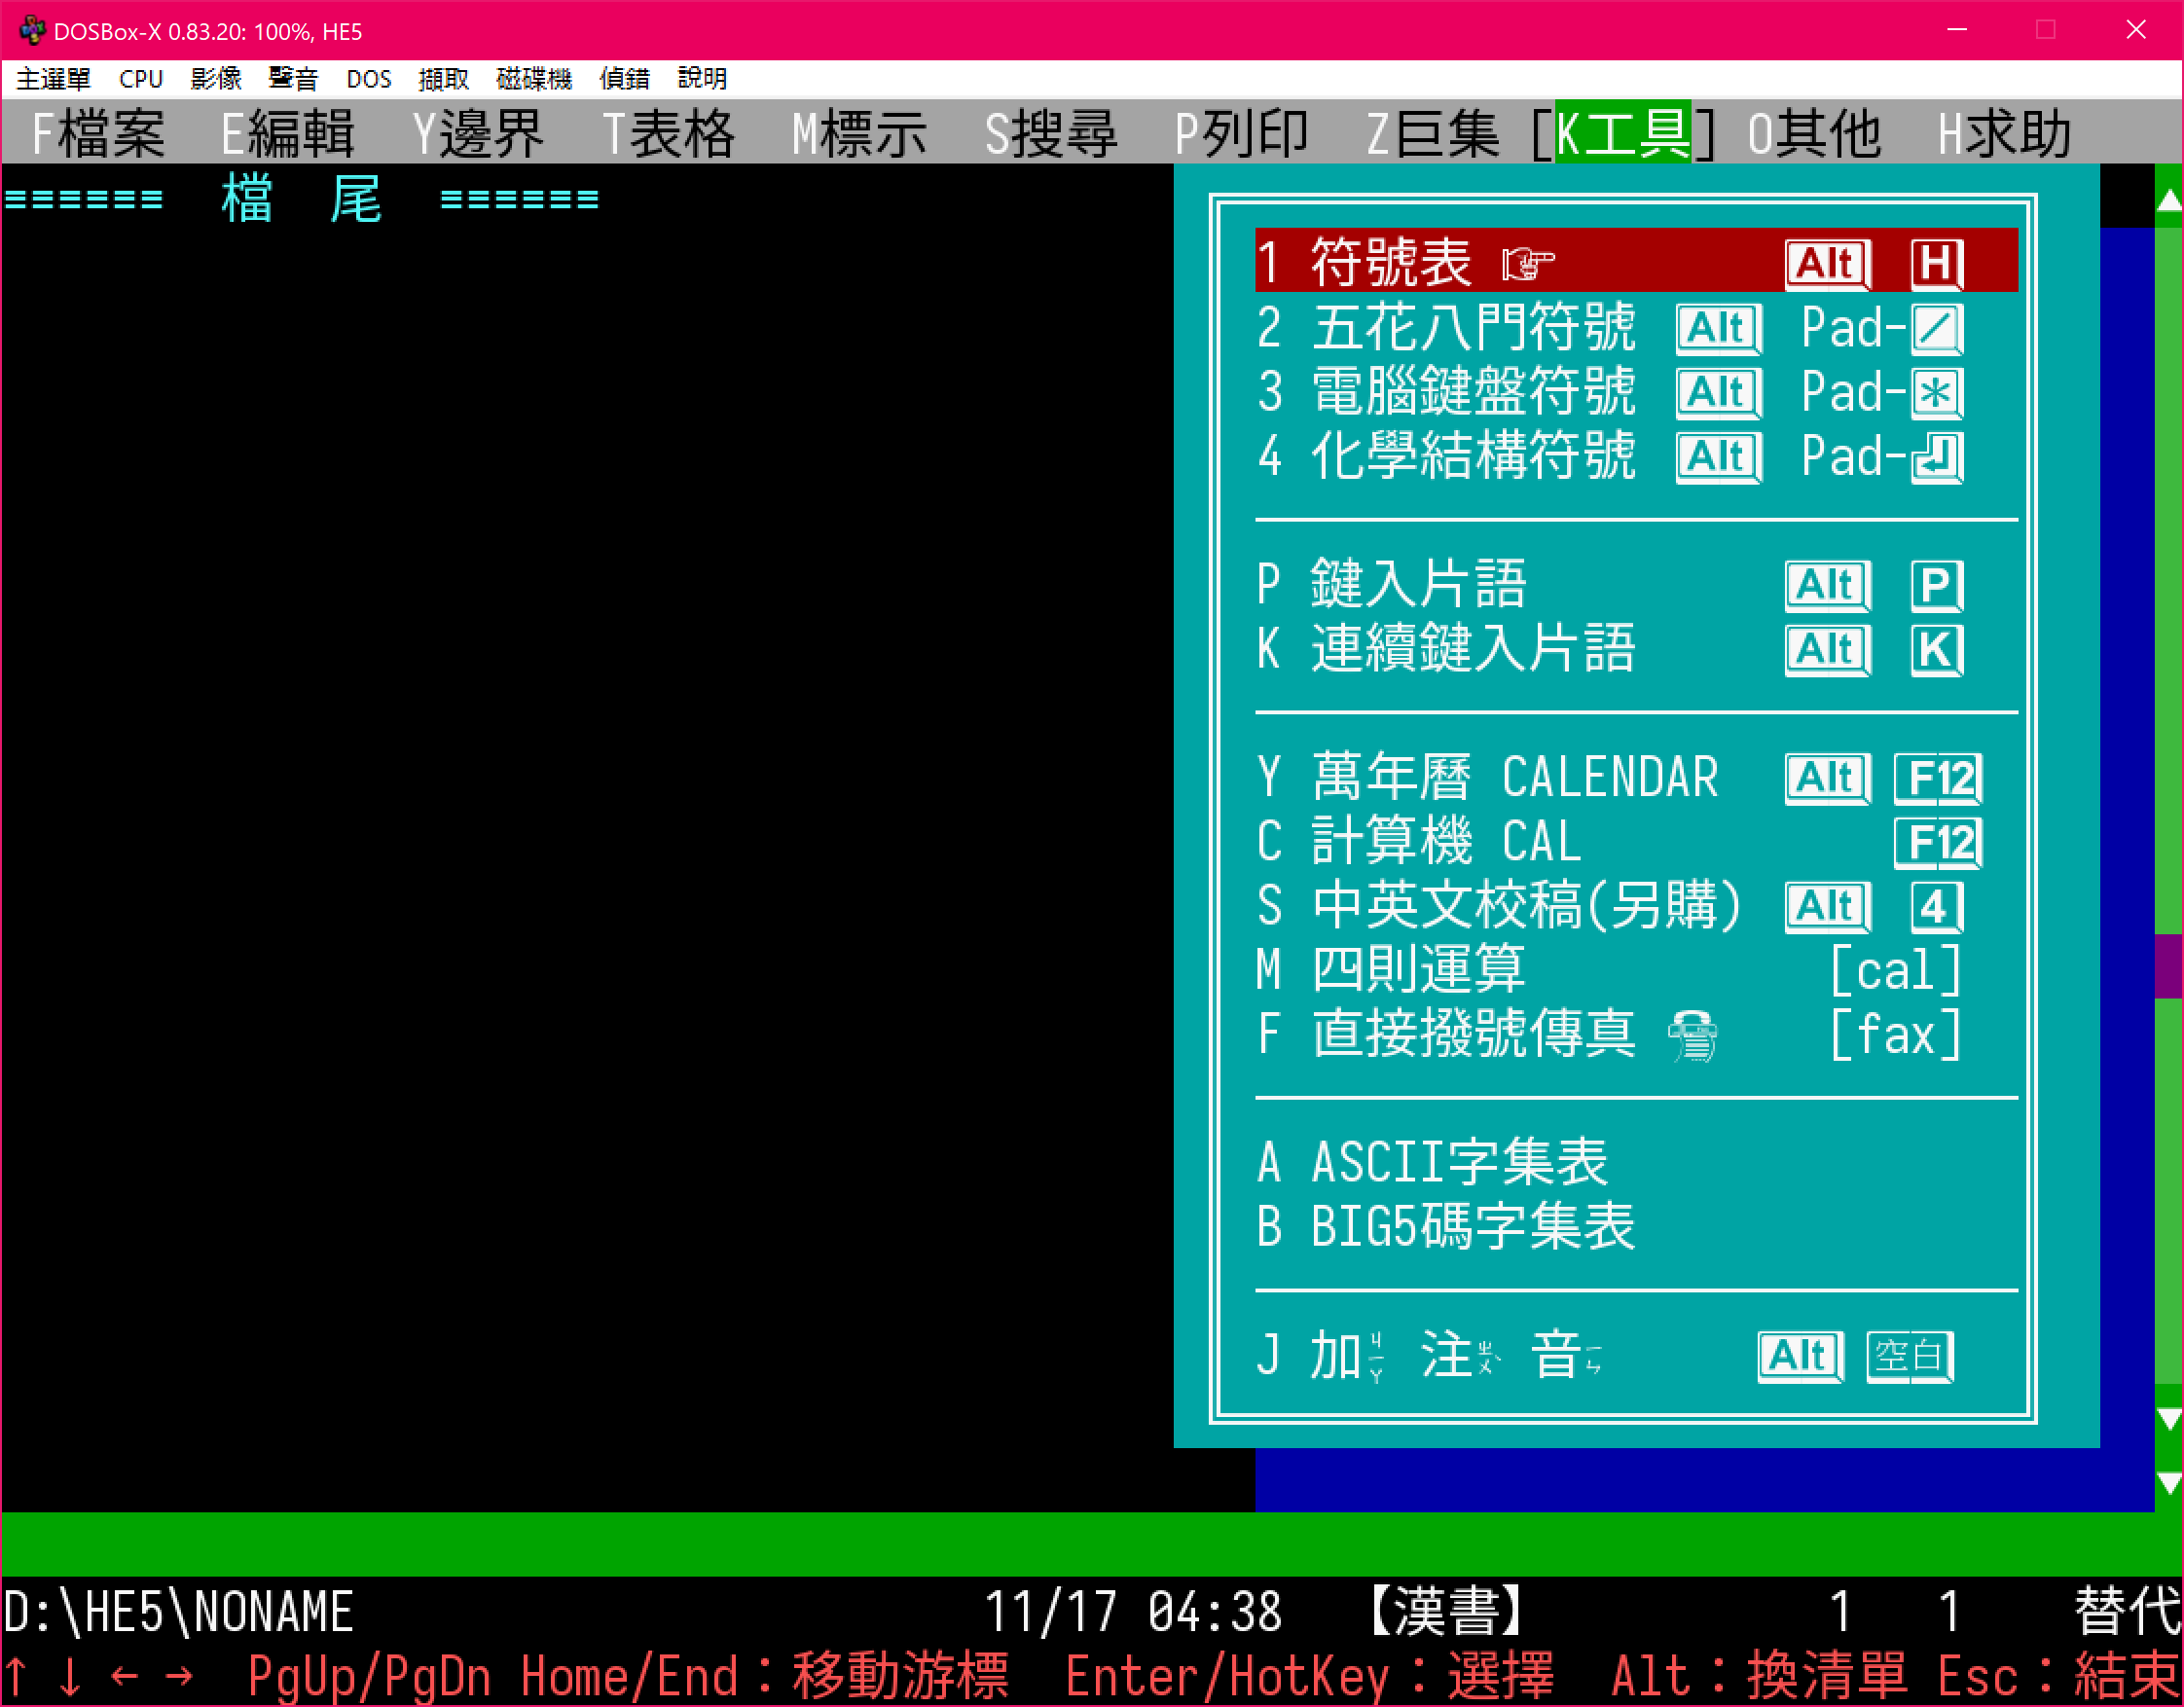 Truetype font output running Hyper Editor 5 with the Traditional Chinese code page and ChinaSea extension